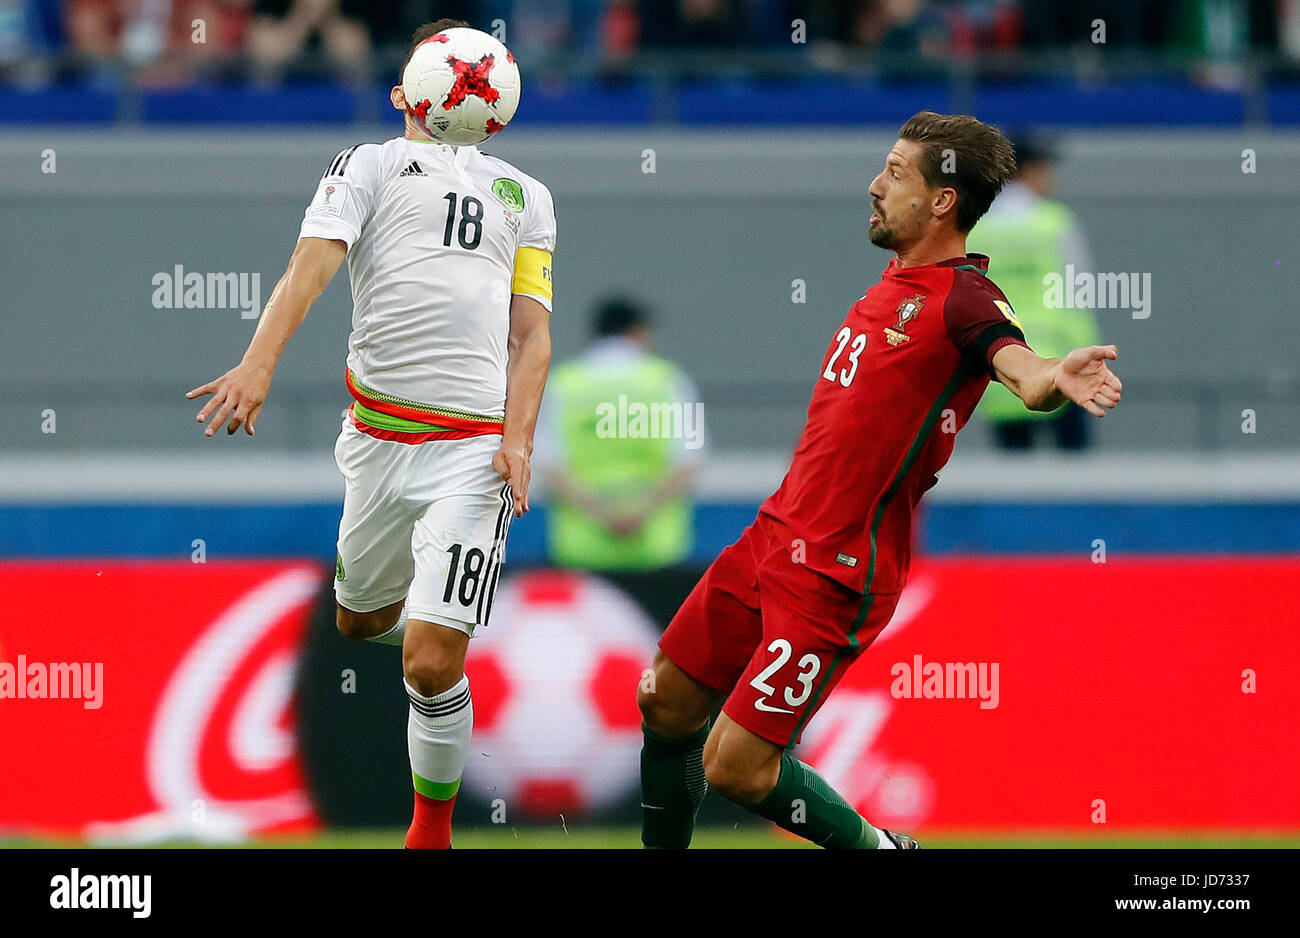 KAZAN, RT - 18.06.2017: PORTUGAL VS. MEXICO - GUARDADO Andres de México battles with ADRIEN of Portugal during a match between Portugal and Mexico valid for the first round of the Confederations Cup 2017 on Sunday (18), held at the Kazan Arena in Kazan, Russia. (Photo: Rodolfo Buhrer/La Imagem/Fotoarena) Stock Photo